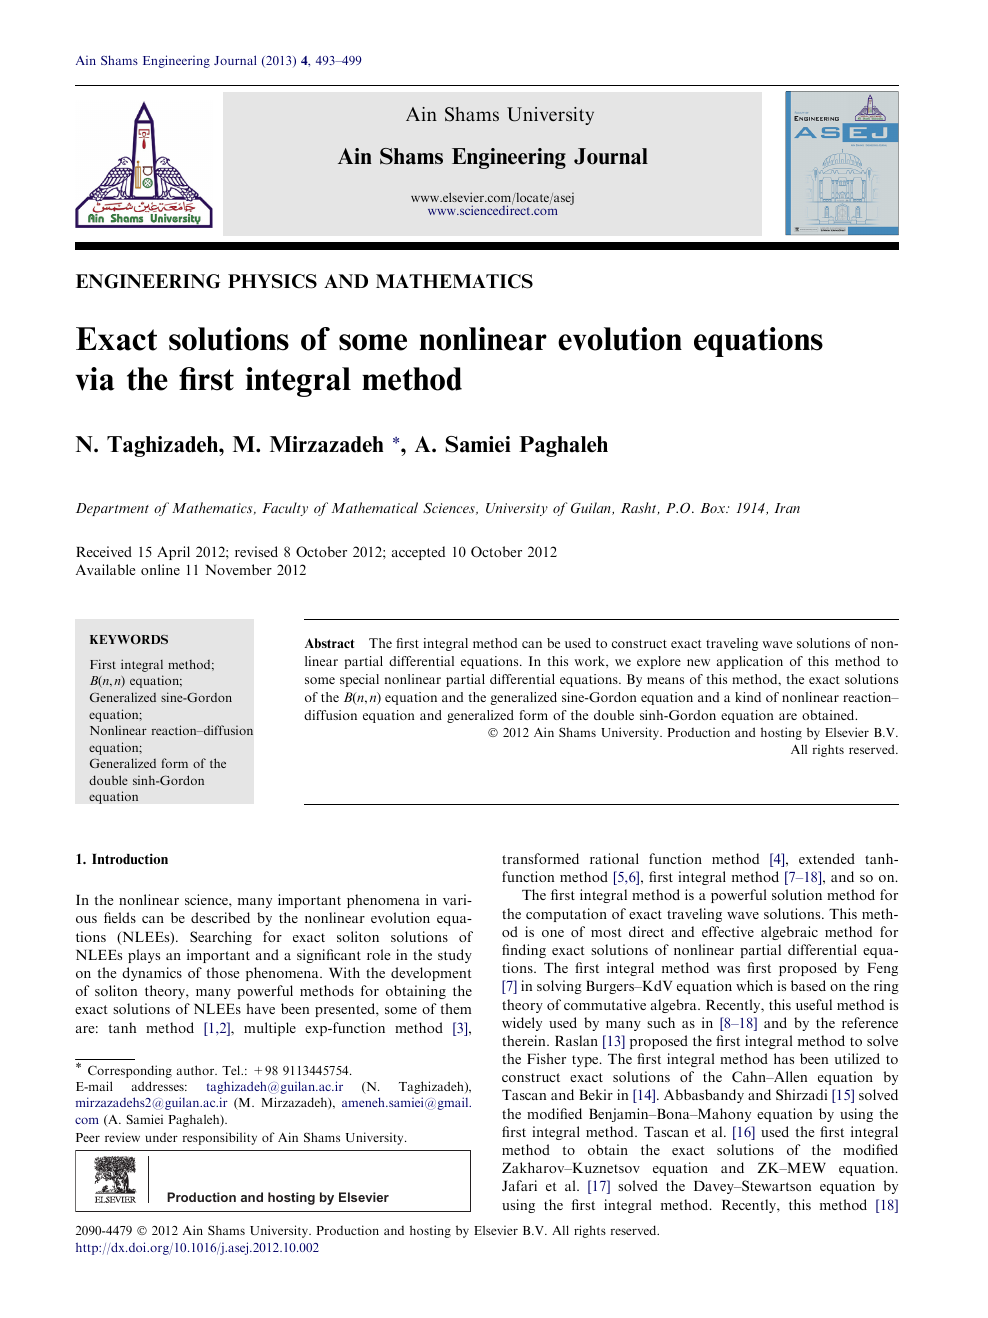 Exact Solutions Of Some Nonlinear Evolution Equations Via The First Integral Method Topic Of Research Paper In Mathematics Download Scholarly Article Pdf And Read For Free On Cyberleninka Open Science Hub